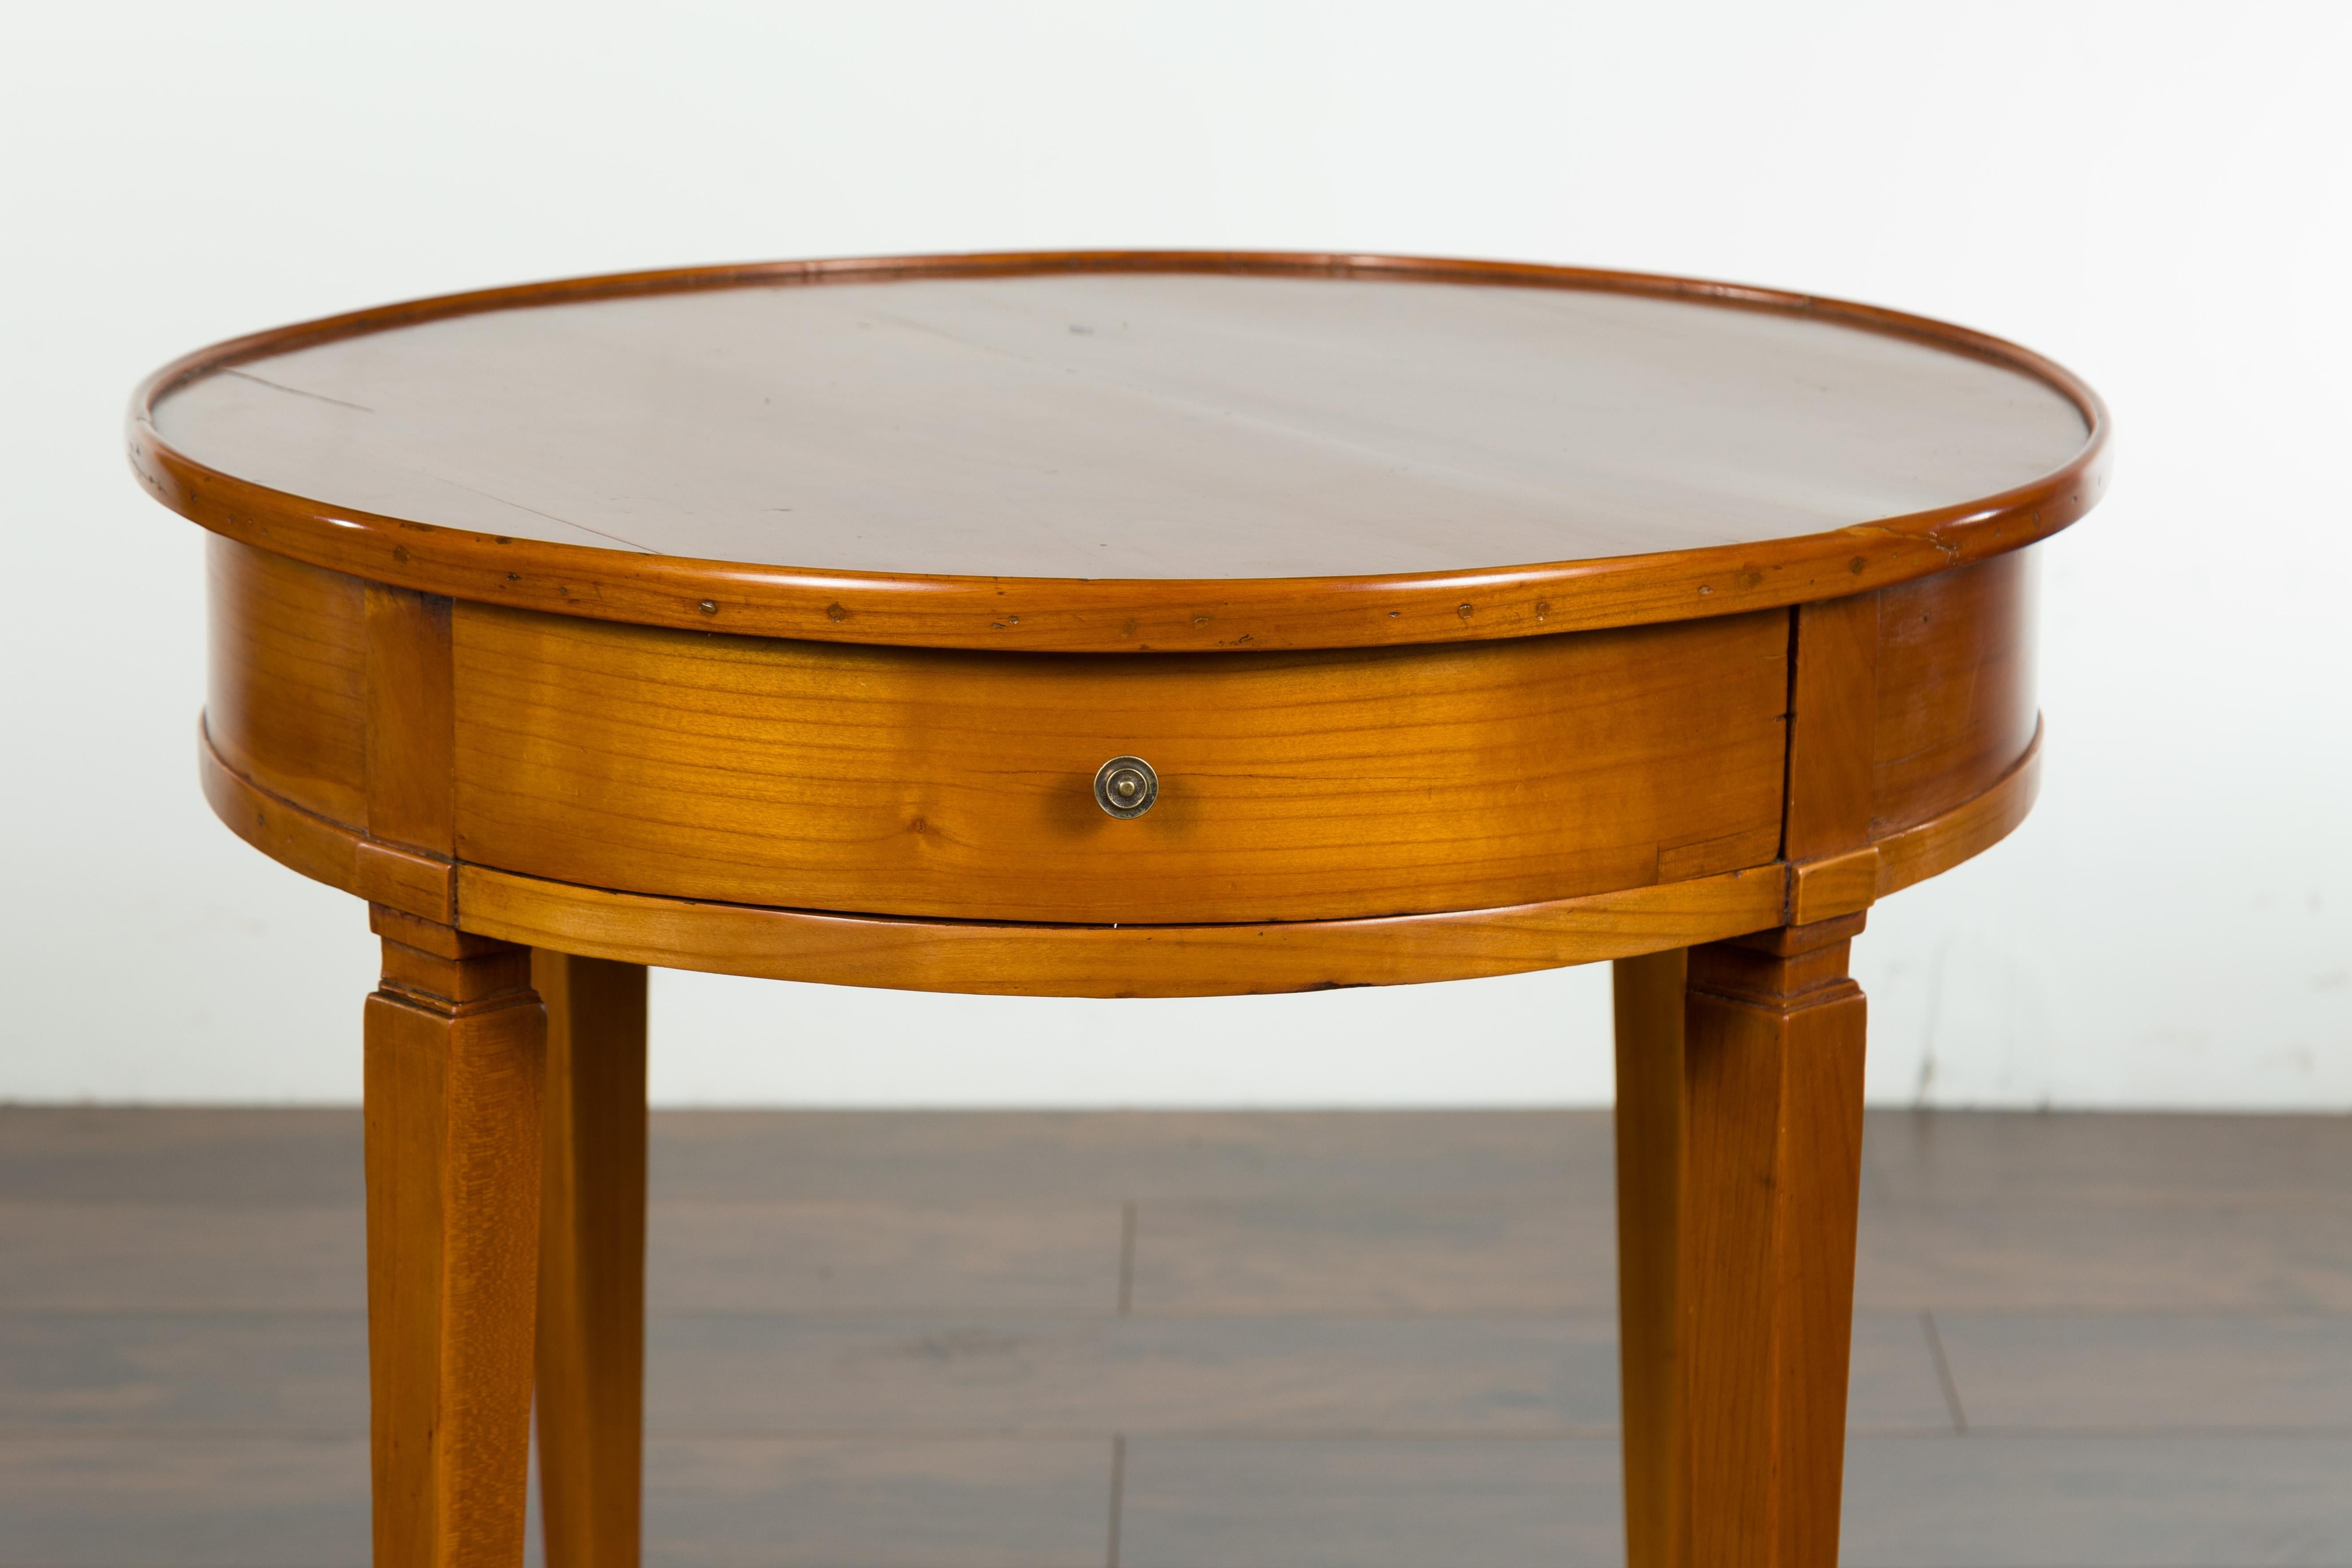 French Napoléon III 1850s Walnut Side Table with Single Drawer and Tapered Legs In Good Condition For Sale In Atlanta, GA